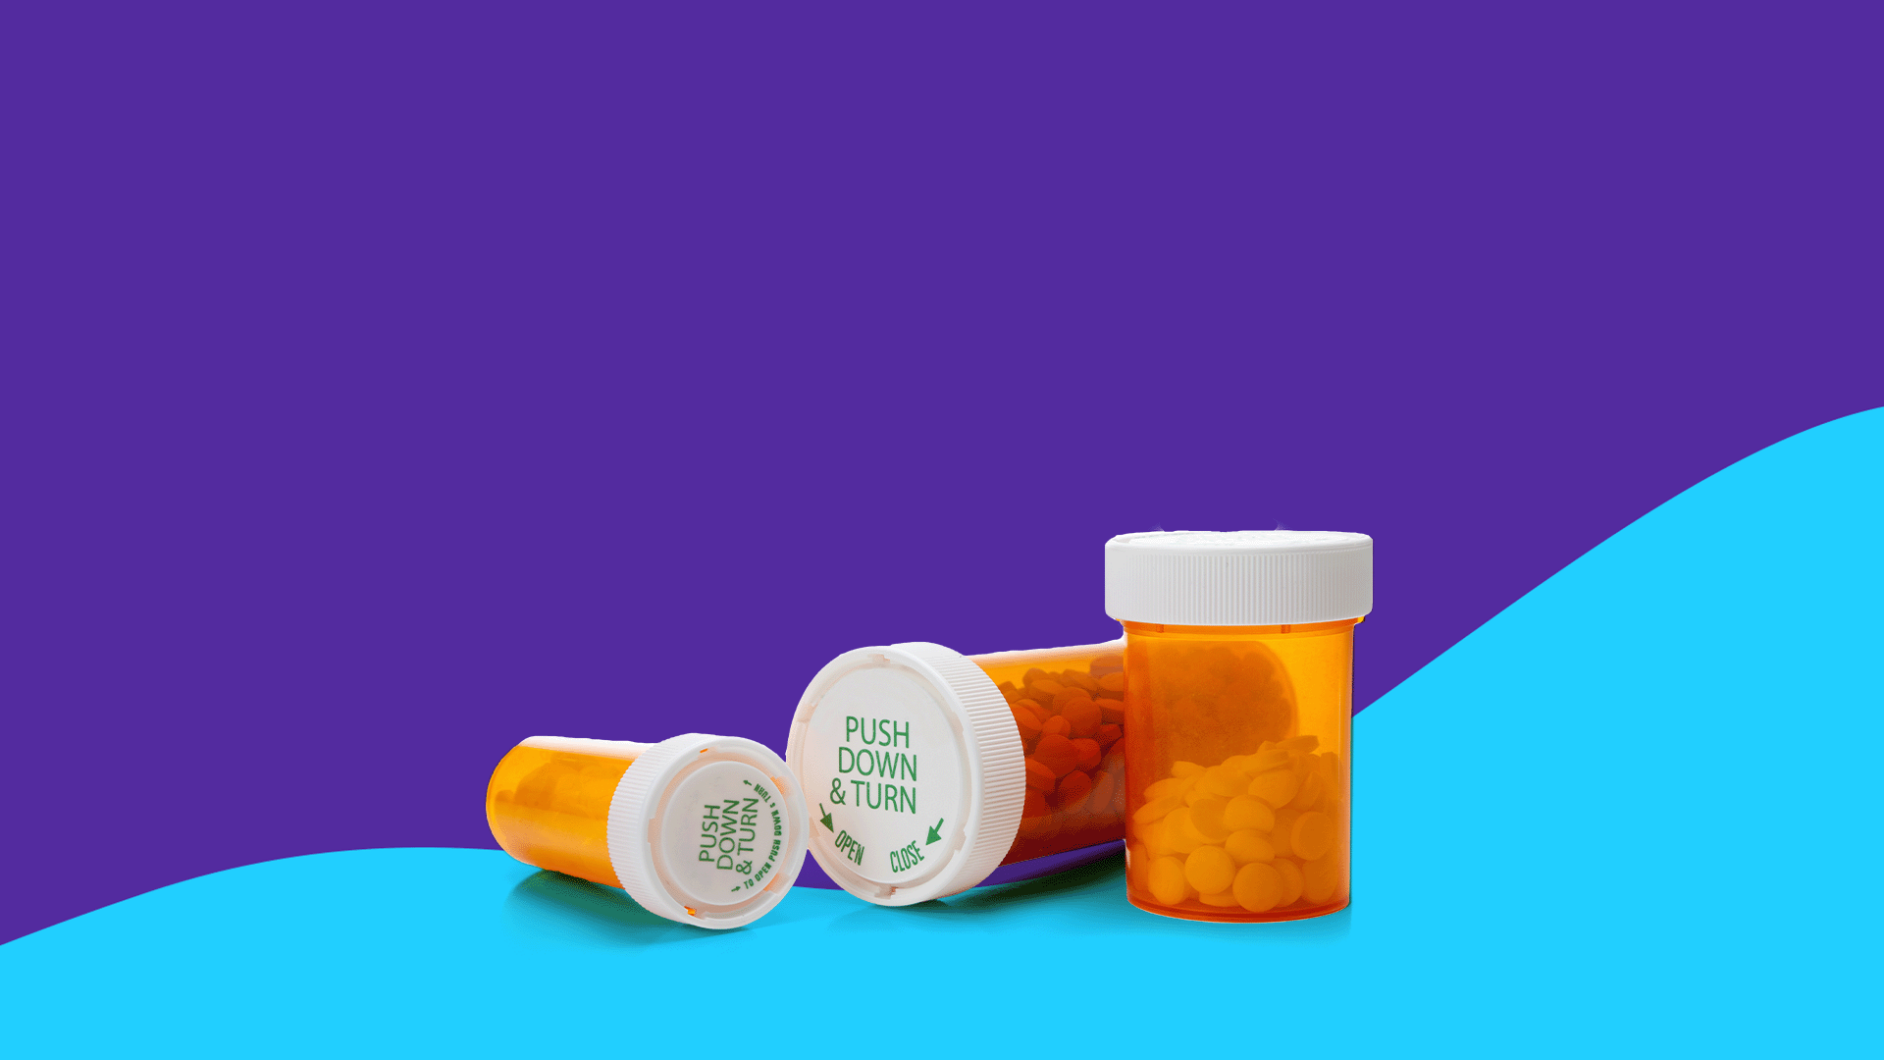 Three Rx pill bottles: How much is Seroquel (quetiapine fumarate) without insurance?